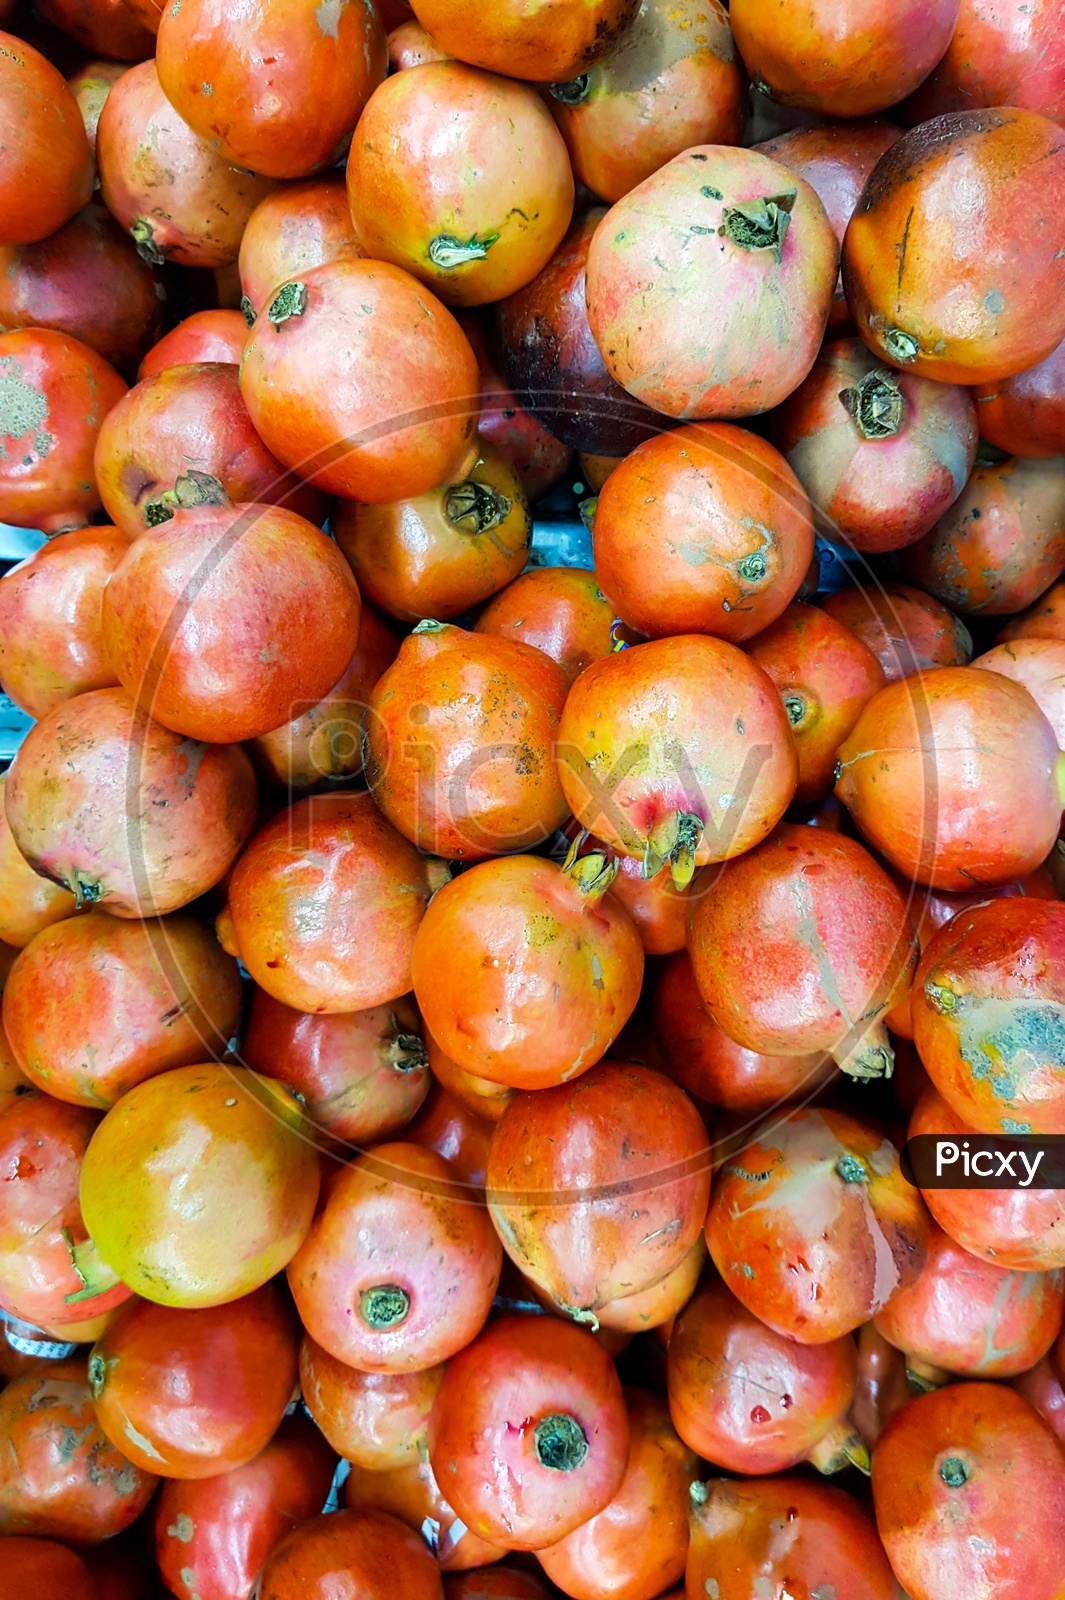 Heap Of Pomegranate For Sale In Market